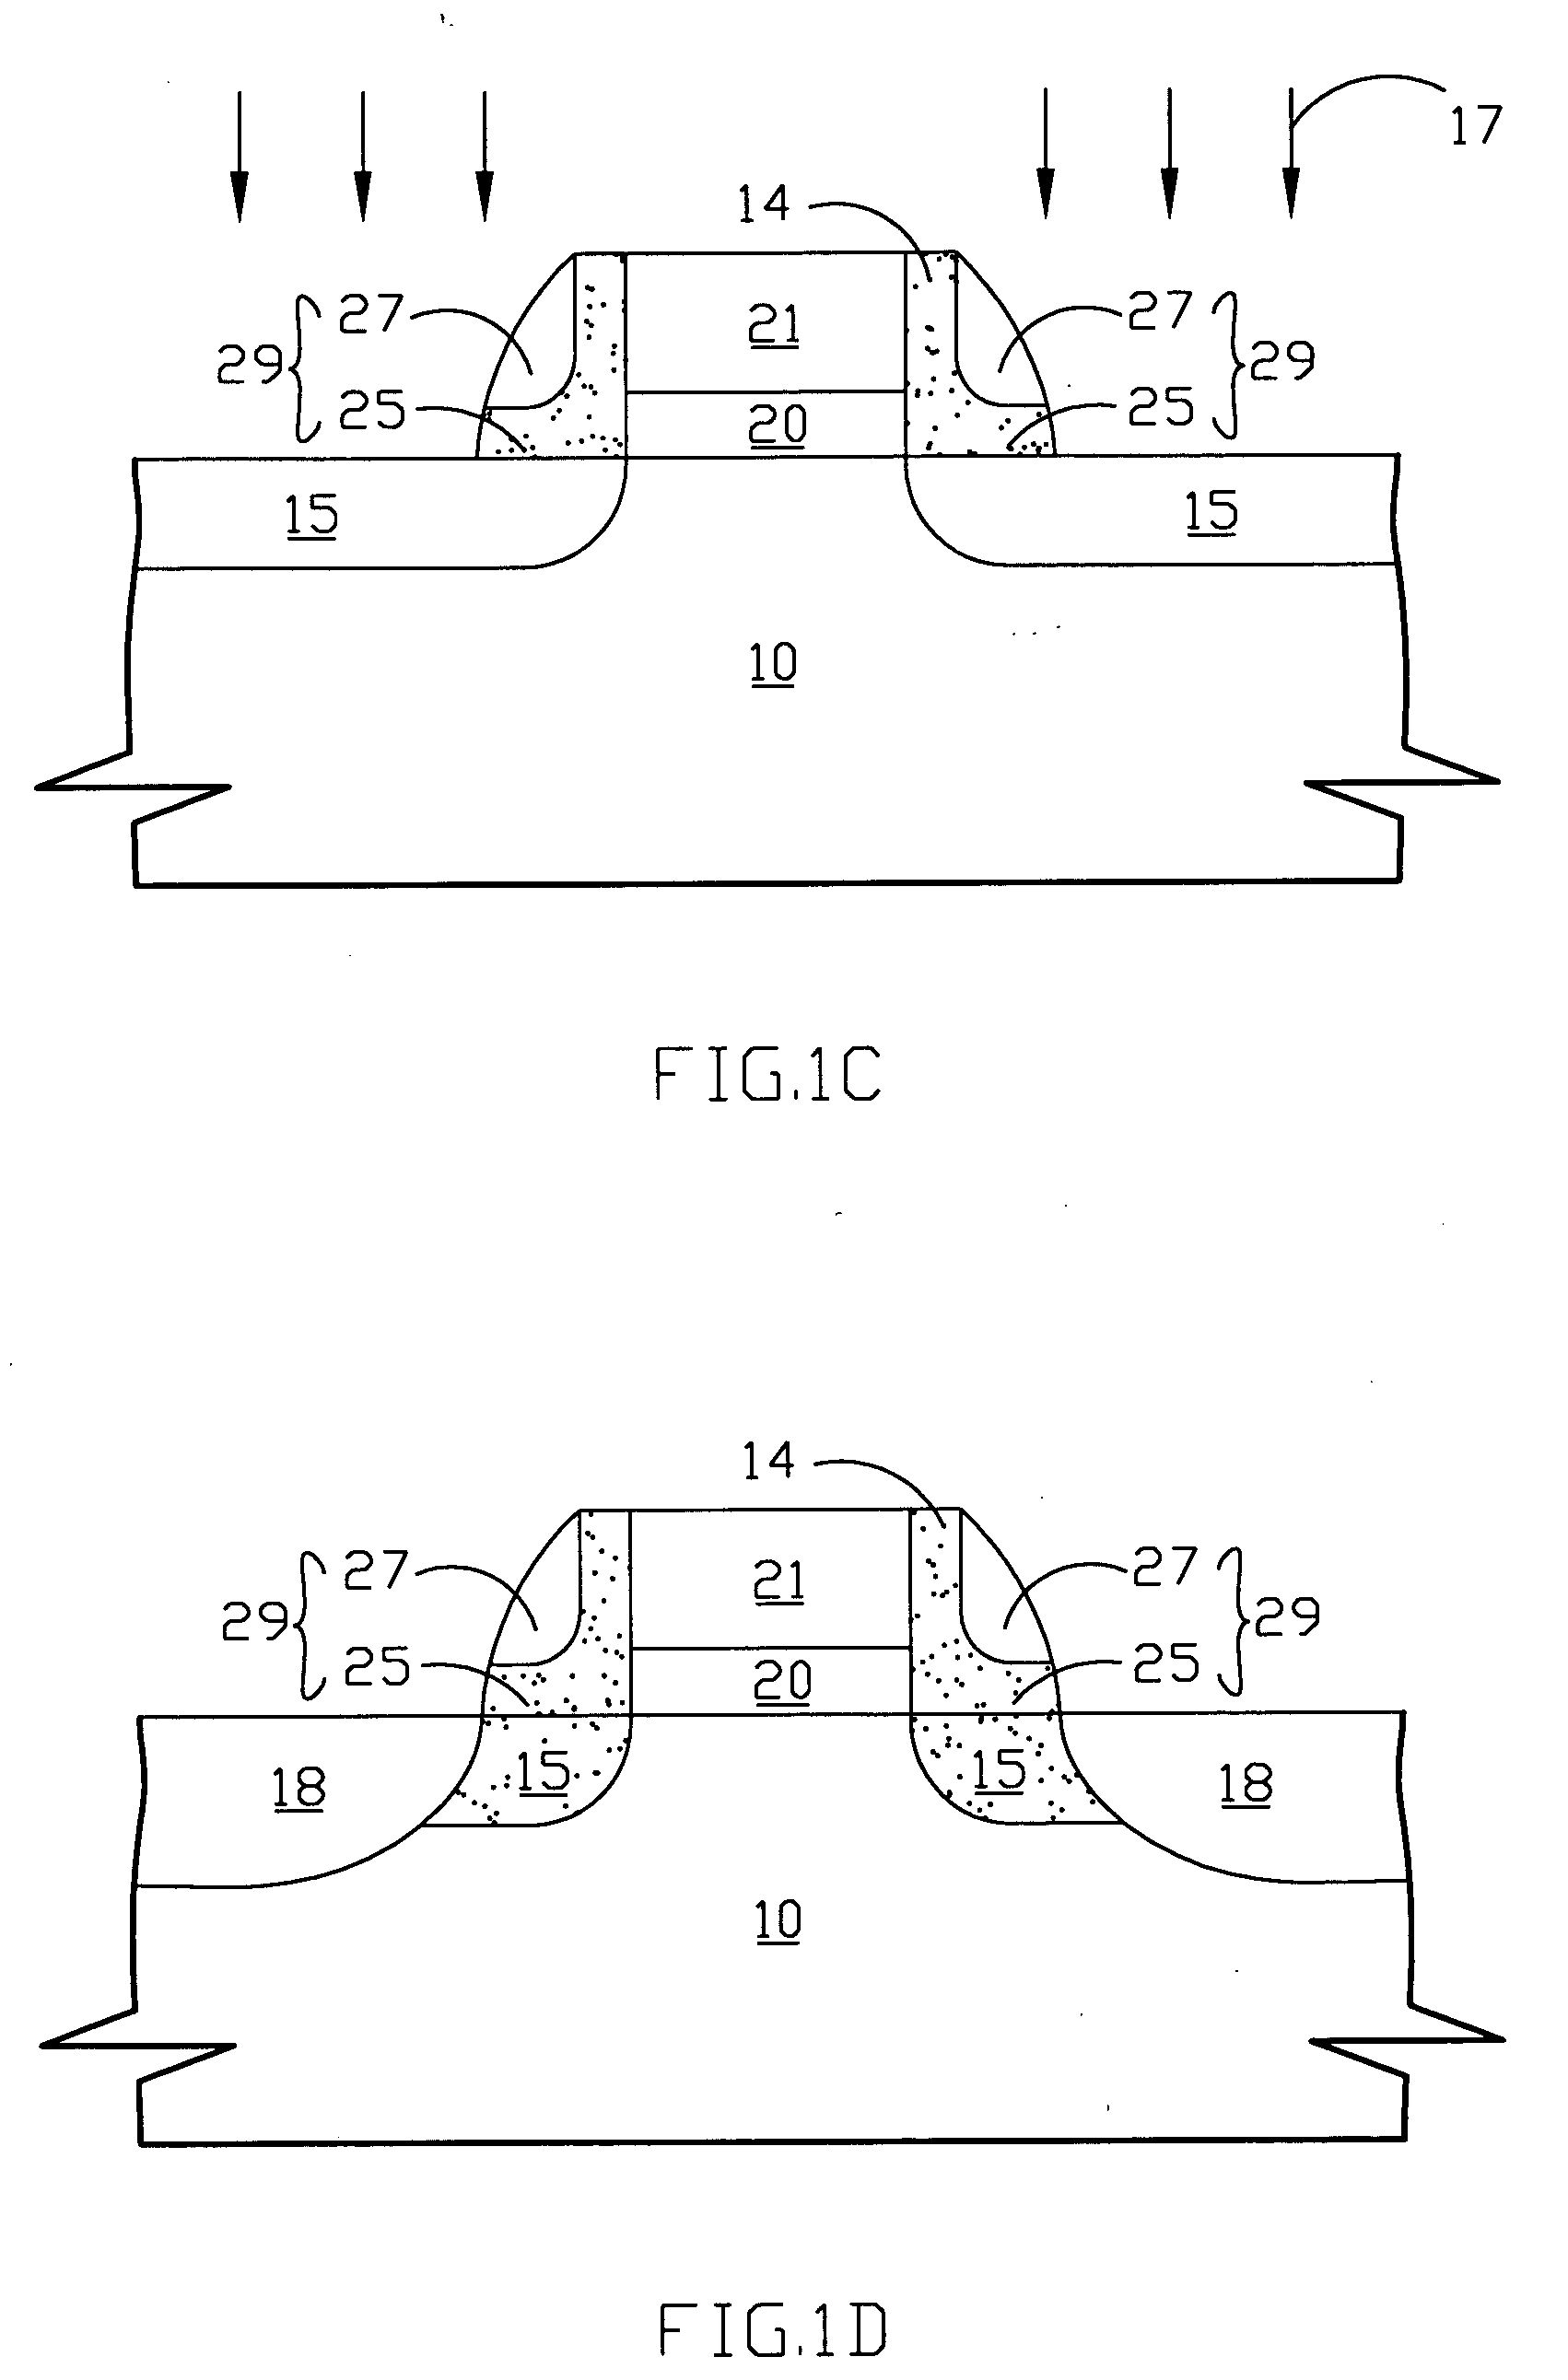 Method for forming a junction region of a semiconductor device